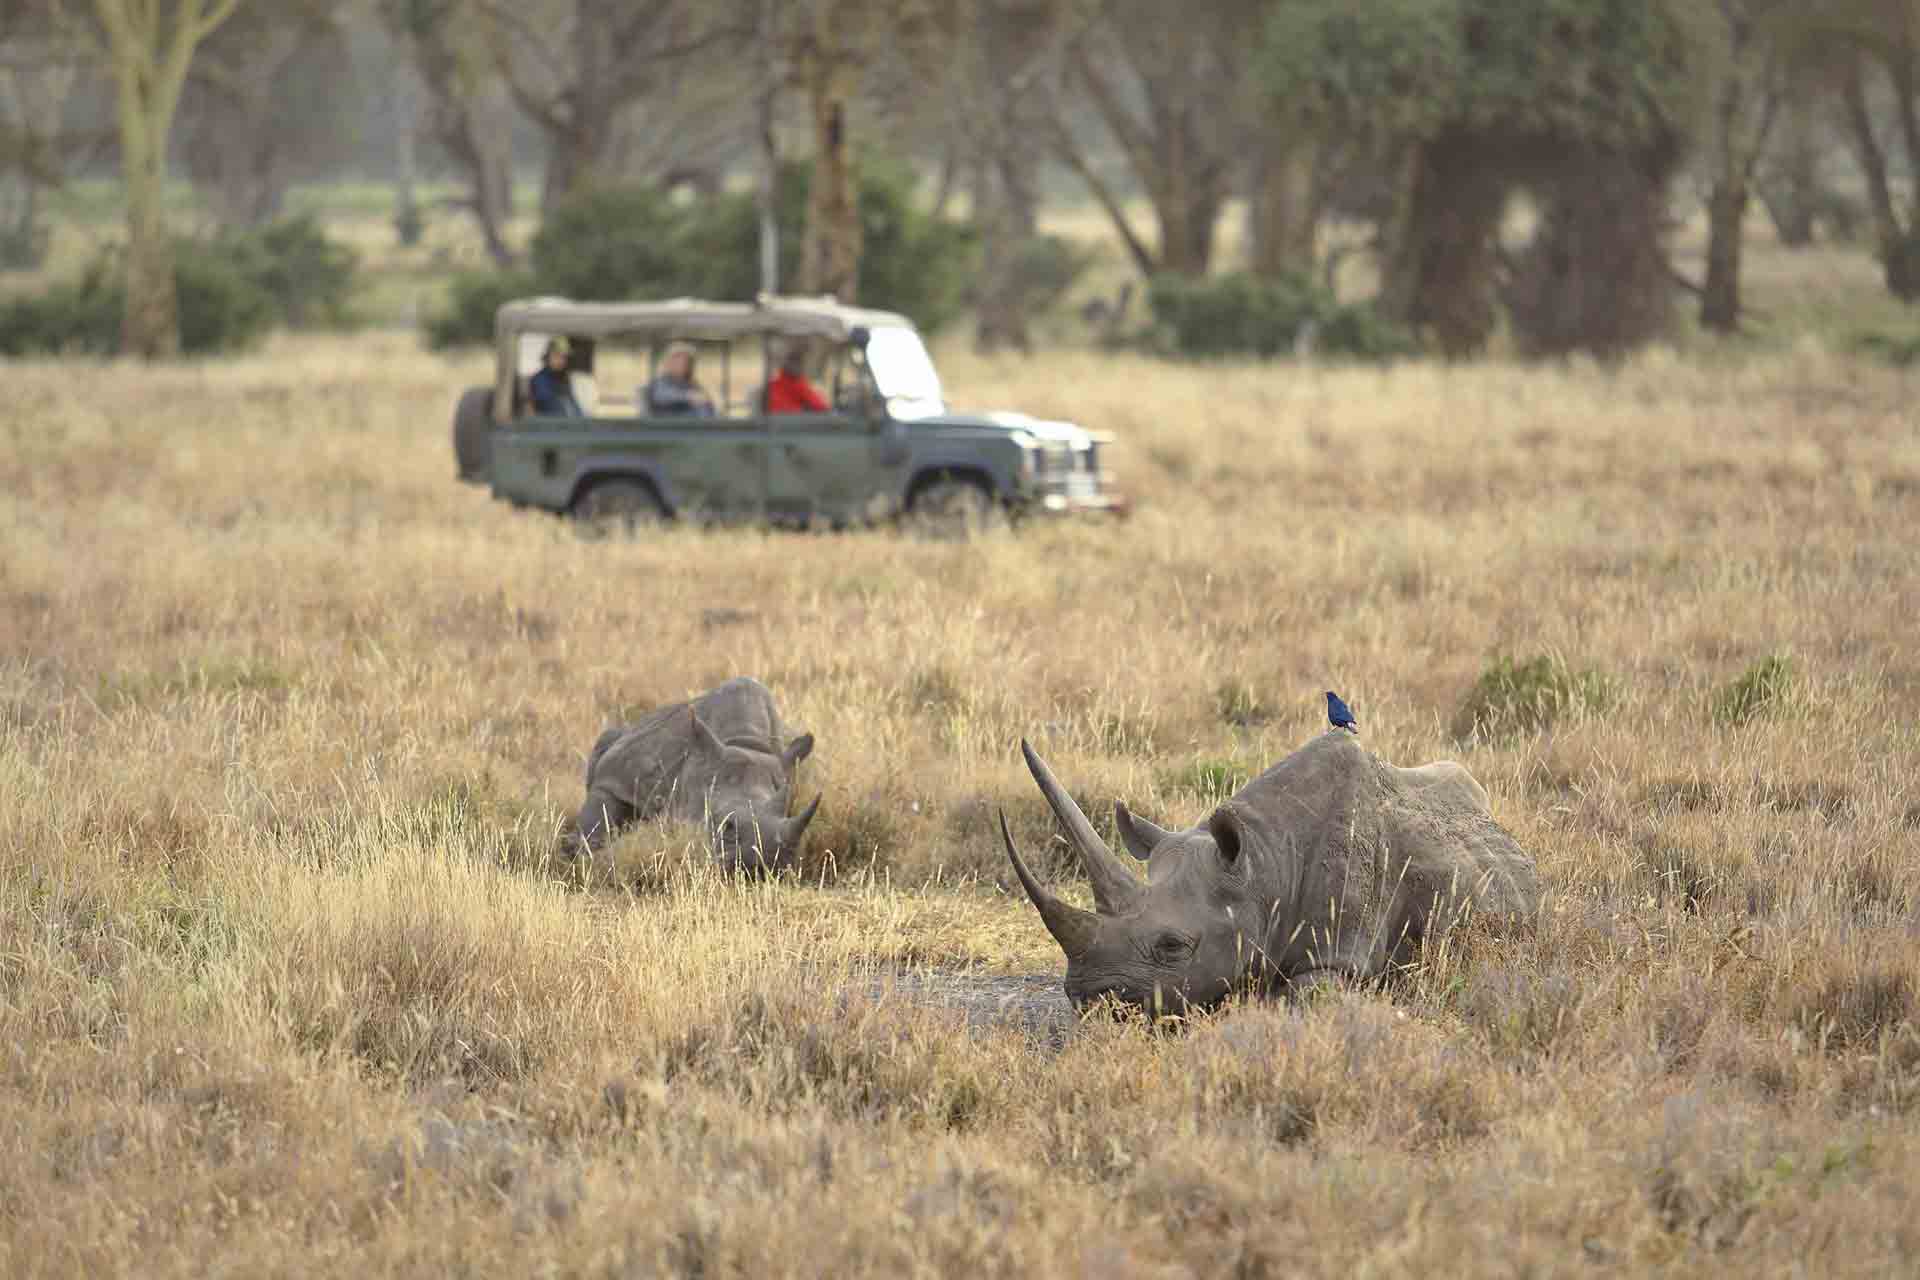 Rhinos spotted on a game drive through the Lewa Conservancy